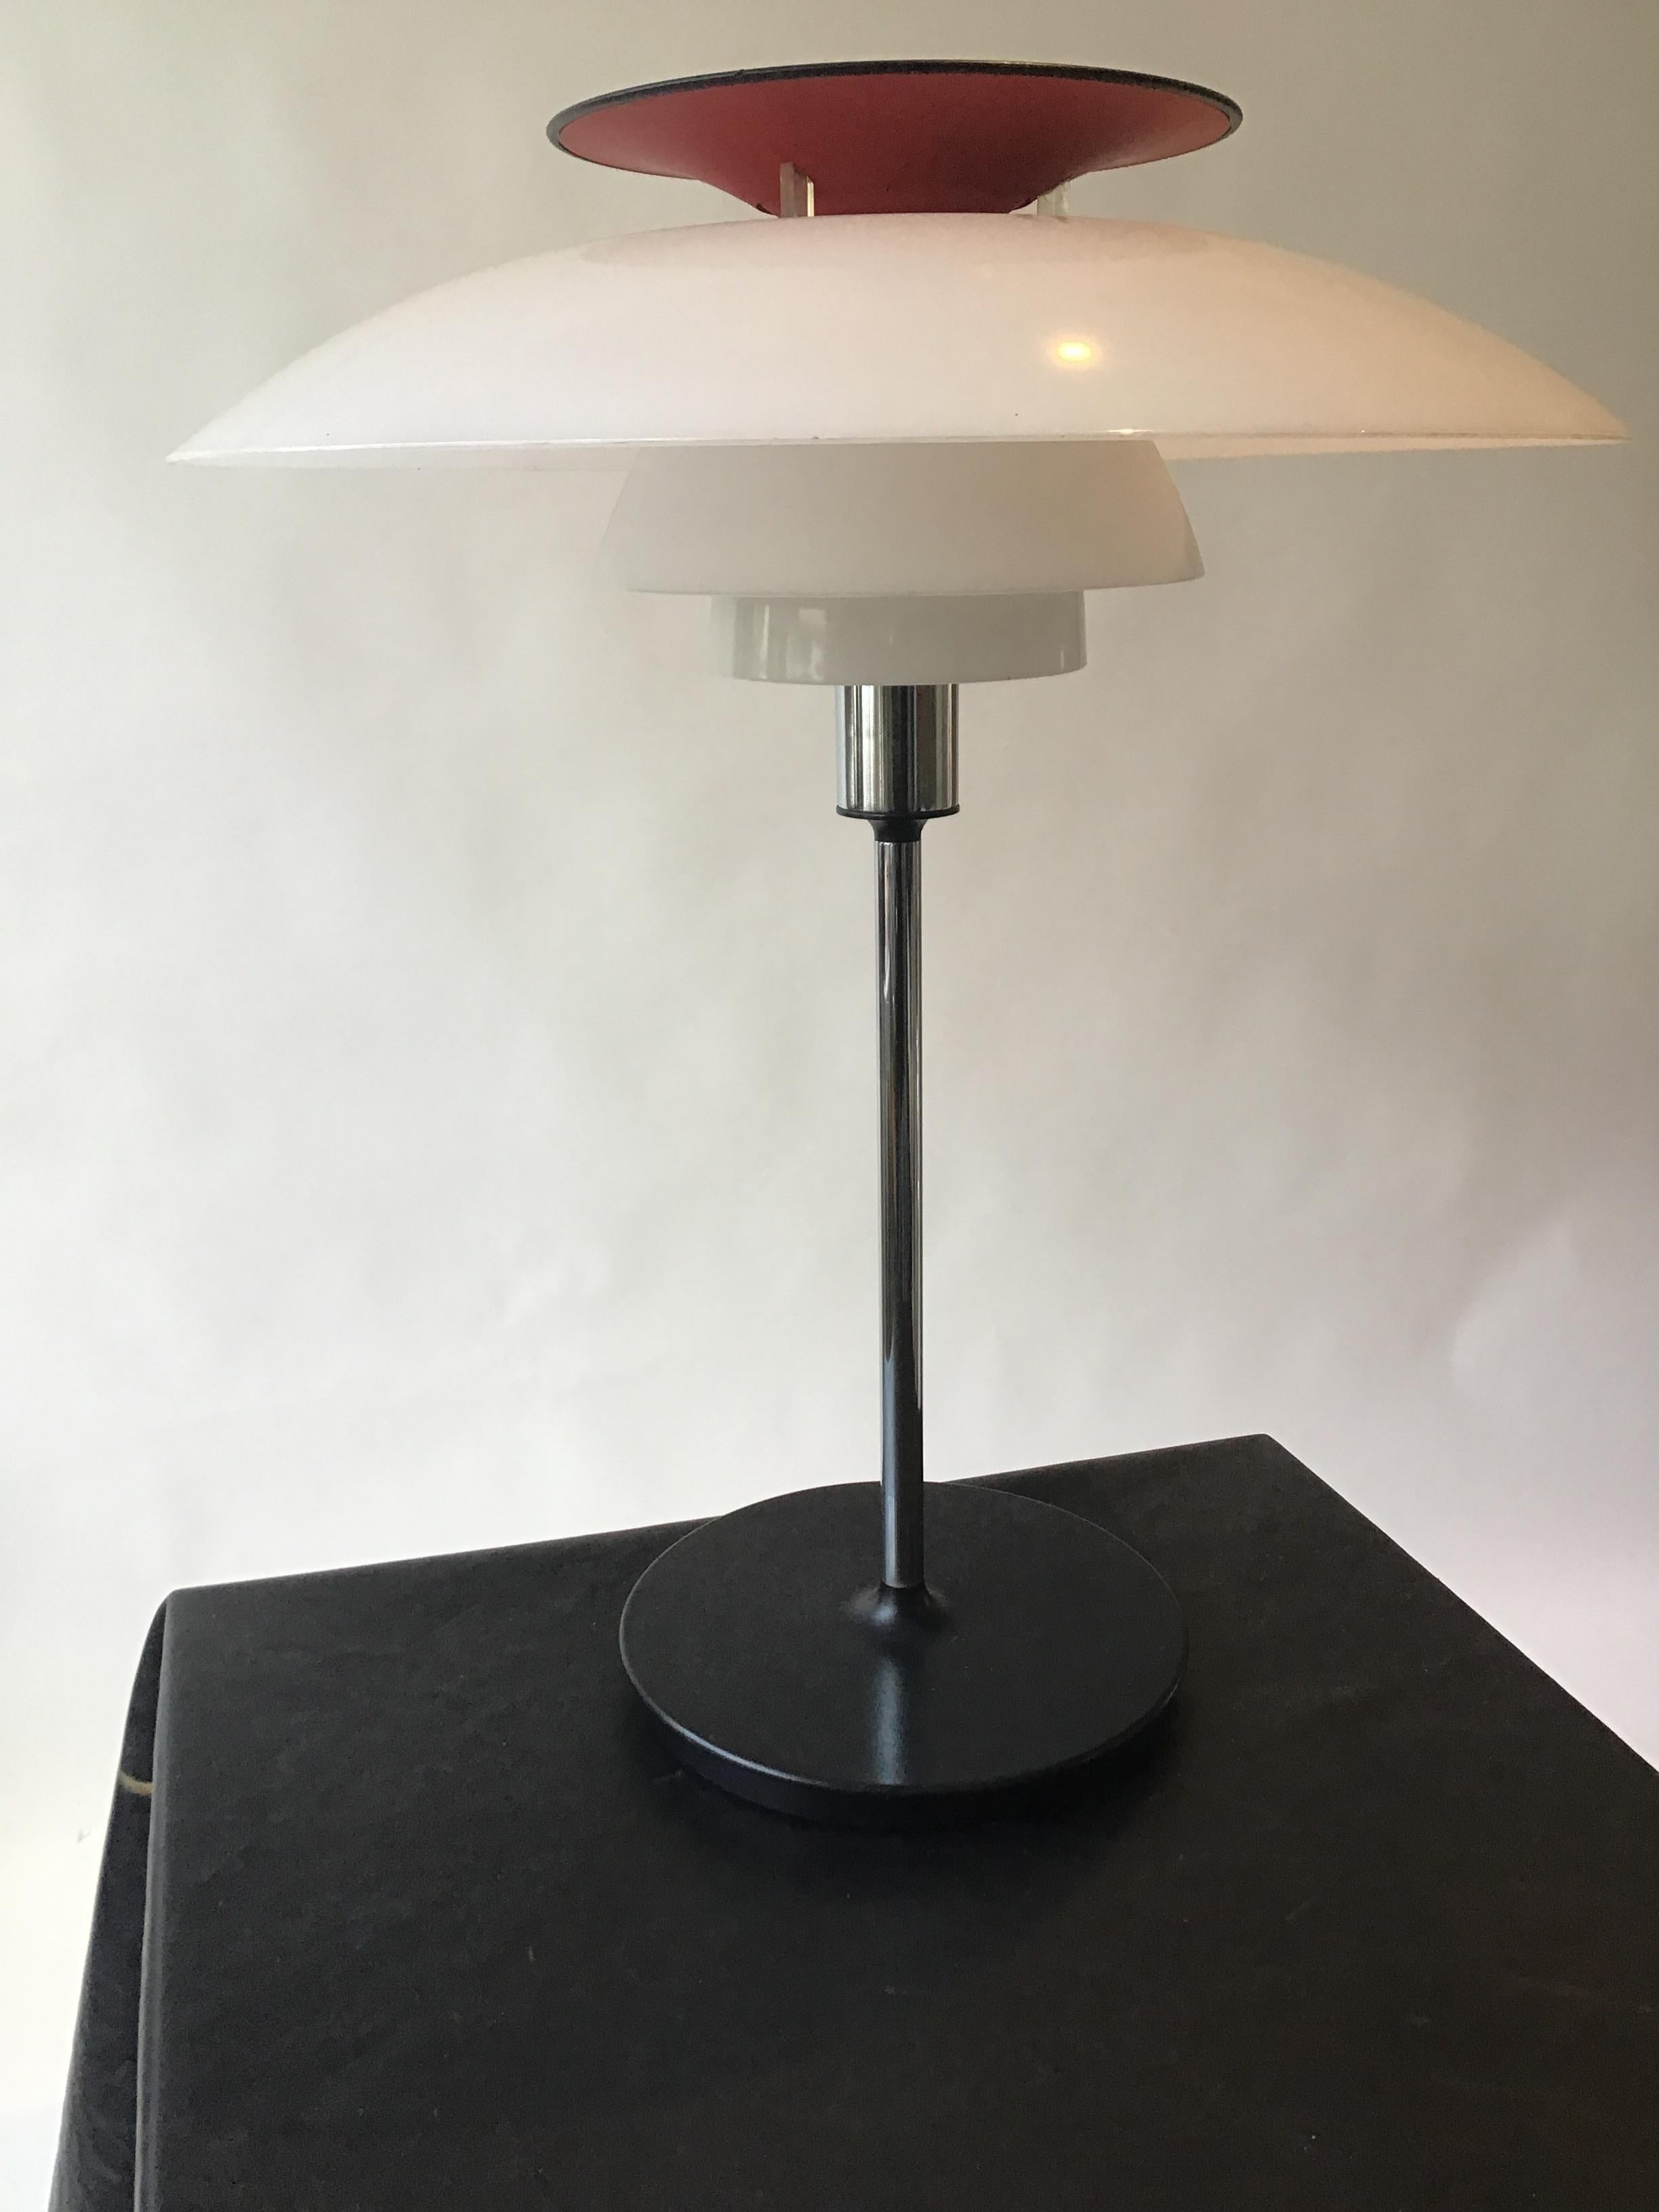 1970s Louis Poulsen red table lamp. Plastic and chrome plated.